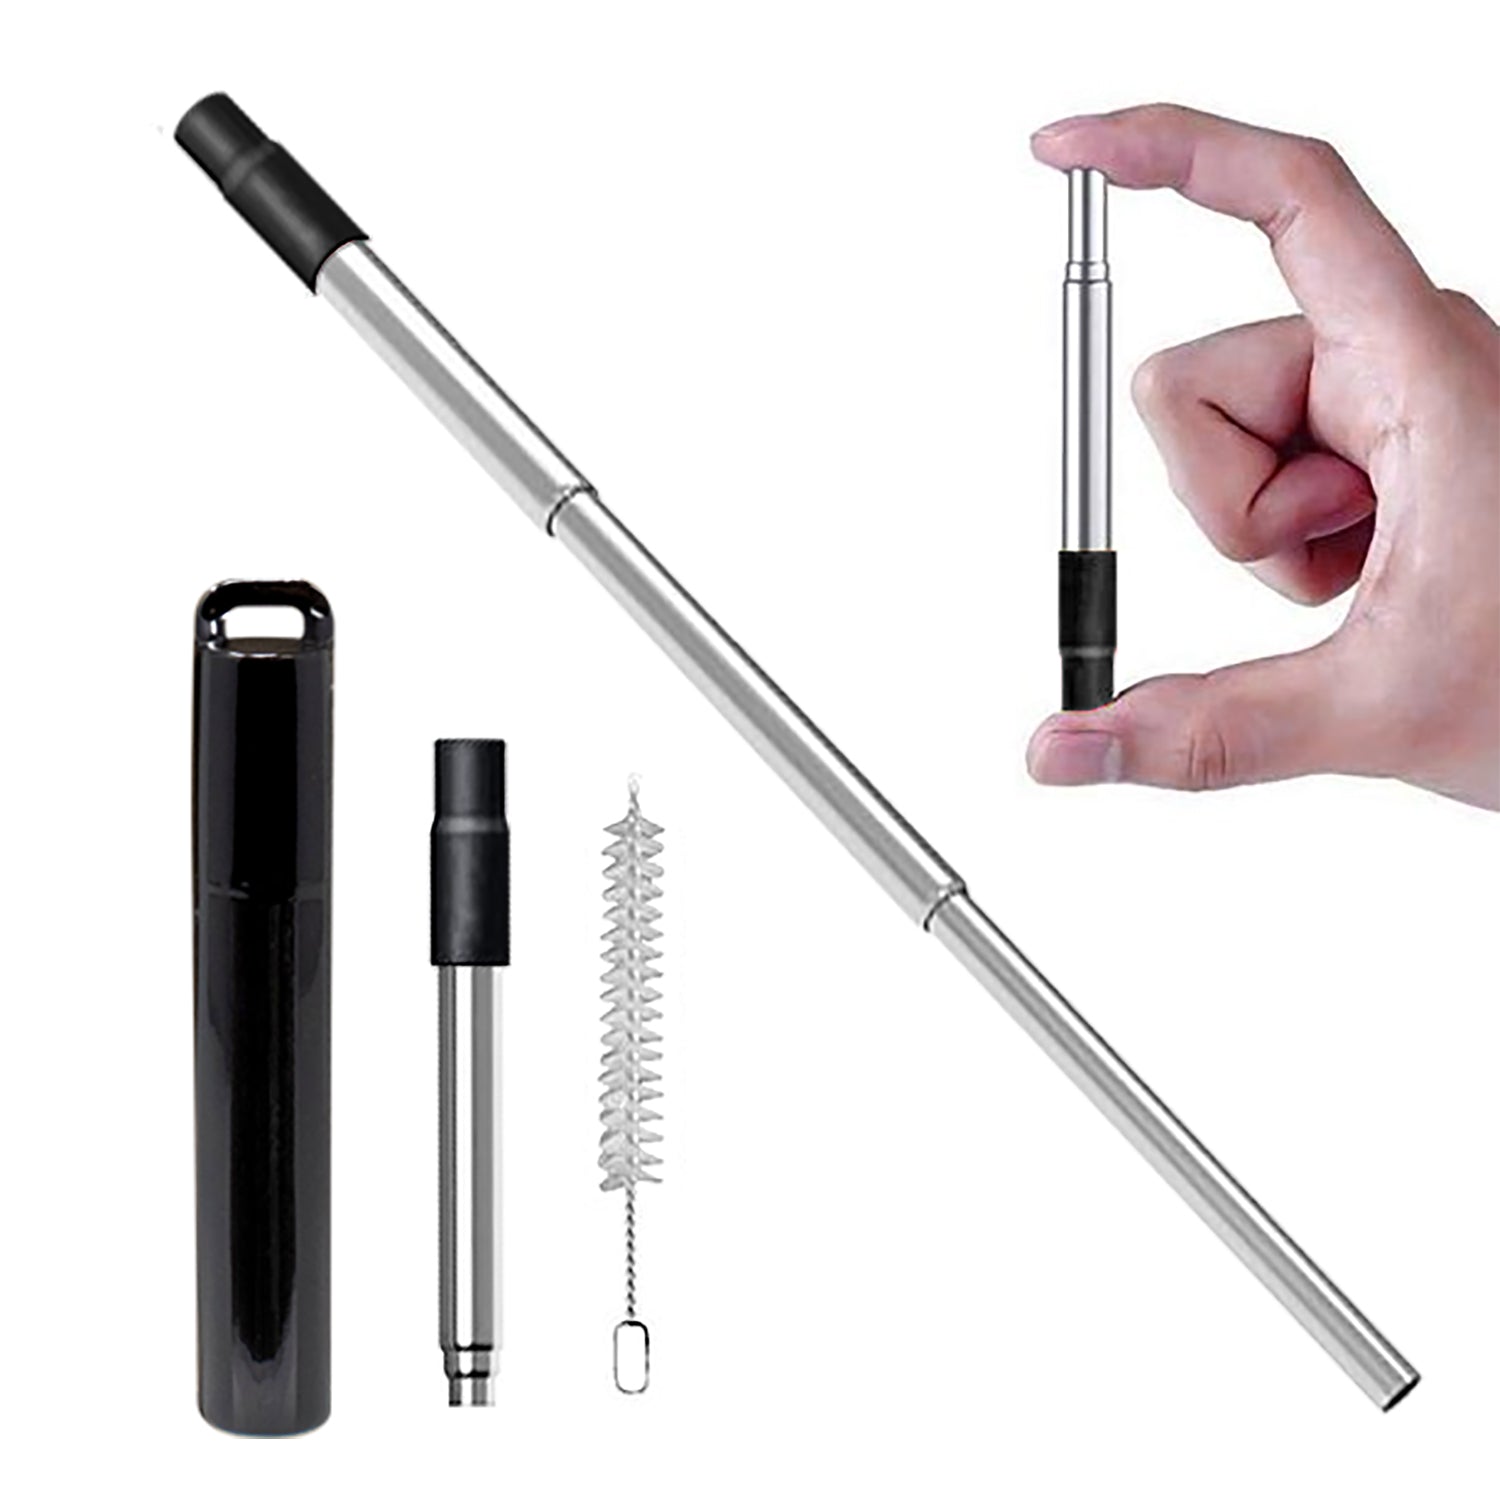 Our Collapsible Reusable Straws, with its telescopic design, is small and easy to carry. It is the safest, most sanitary way to use a straw when you are out of the house.  Eco-friendly materials made of high quality stainless steel reduces the chance of these straws ending up in the ocean and endangering vulnerable sea life. Every straw come with 1 stainless steel cleaning brush which is long enough to wash the entire straw. 